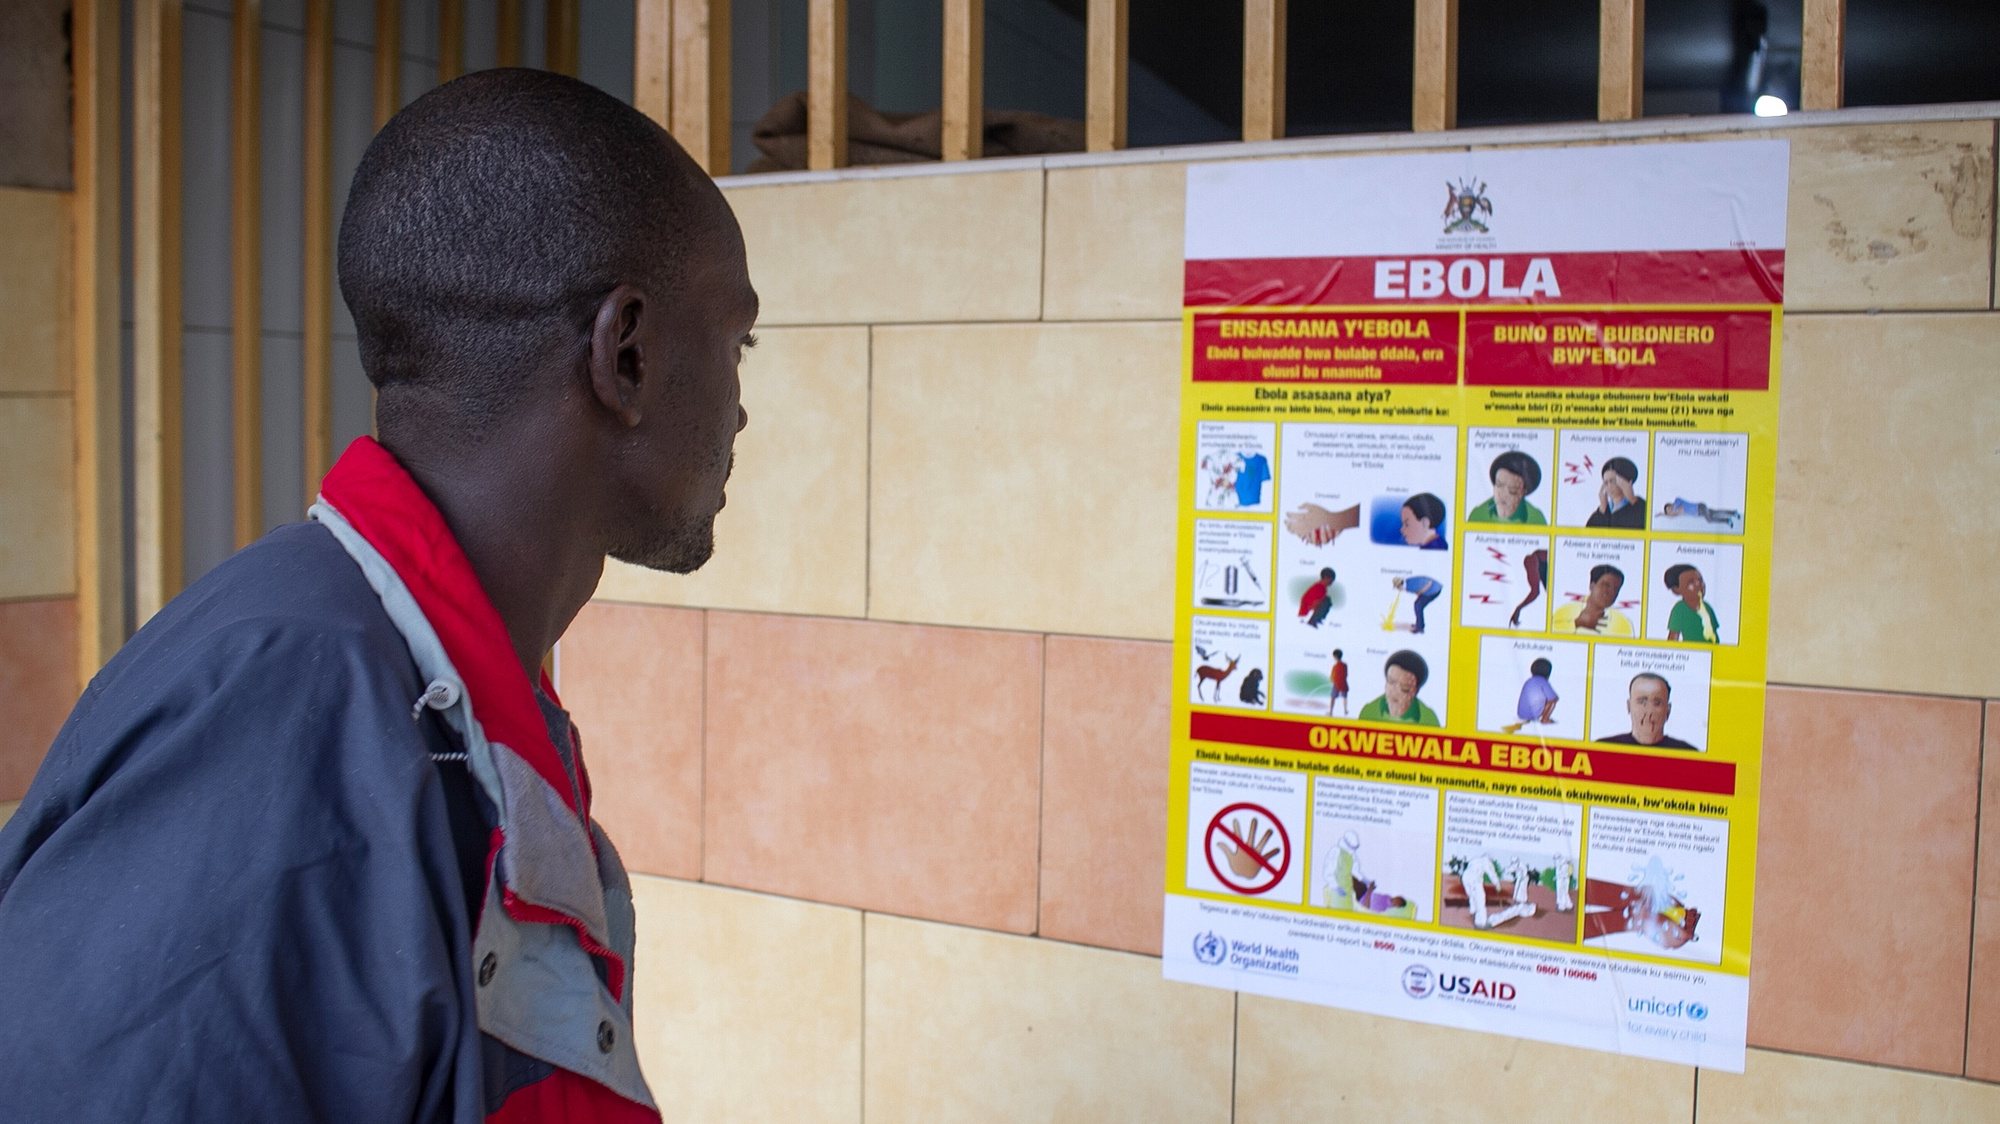 epa10212384 A man looks at an Ebola virus disease awareness campaign poster following an outbreak of Ebola in Uganda, in Kampala, Uganda, 28 September 2022. According to Uganda&#039;s Health Ministry, Ebola infections have risen across some districts in Uganda with the number of confirmed and suspected deaths at 36. The president addressed the nation on measures the government is putting in place to mitigate the spread.  EPA/Stringer